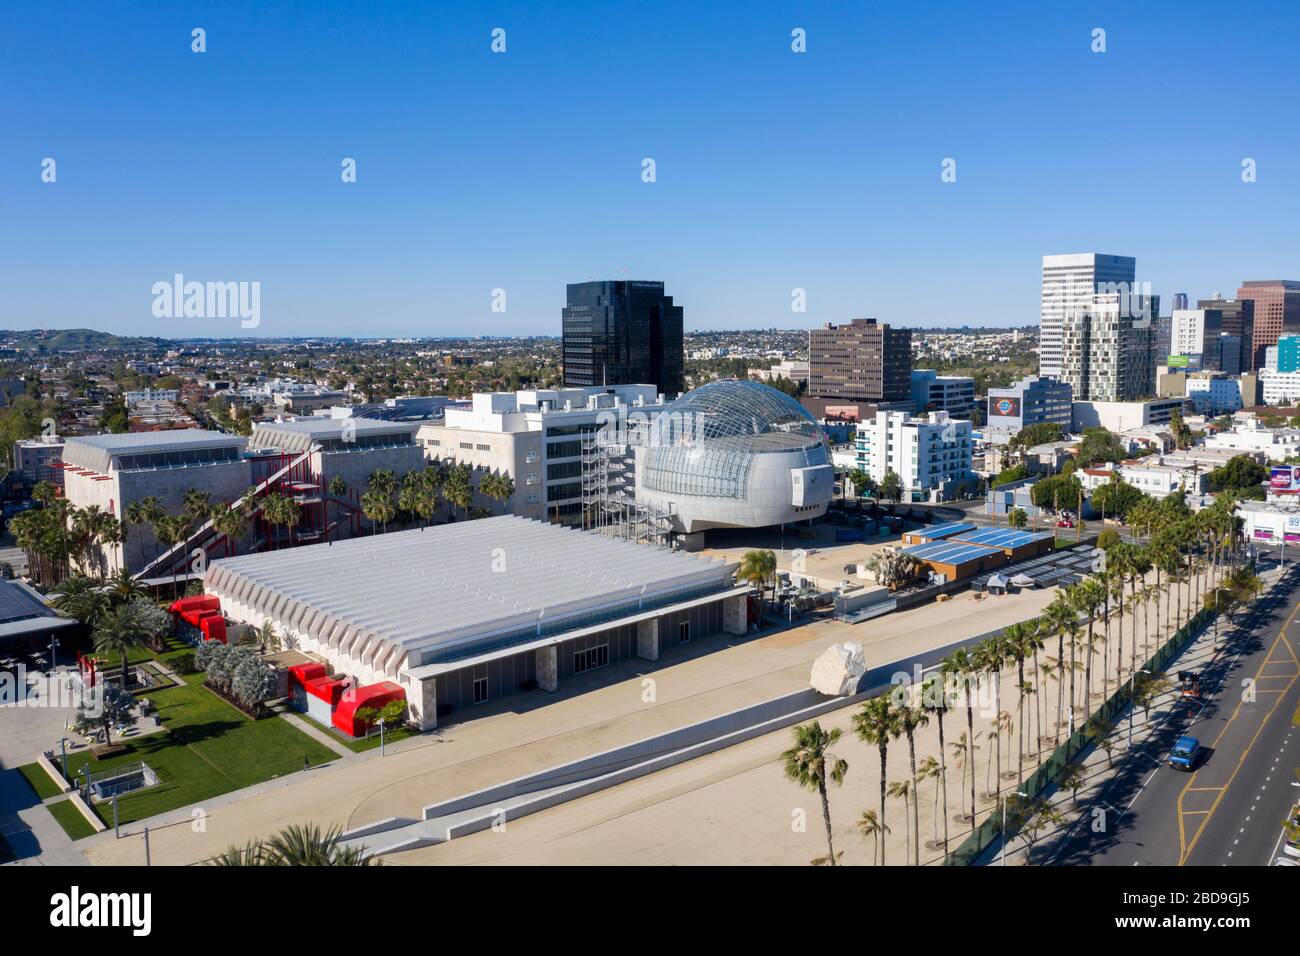 Vista aerea dell'Academy Museum of Motion Pictures a Mid-Wilshire, Los Angeles e l'adiacente museo LACMA Foto Stock